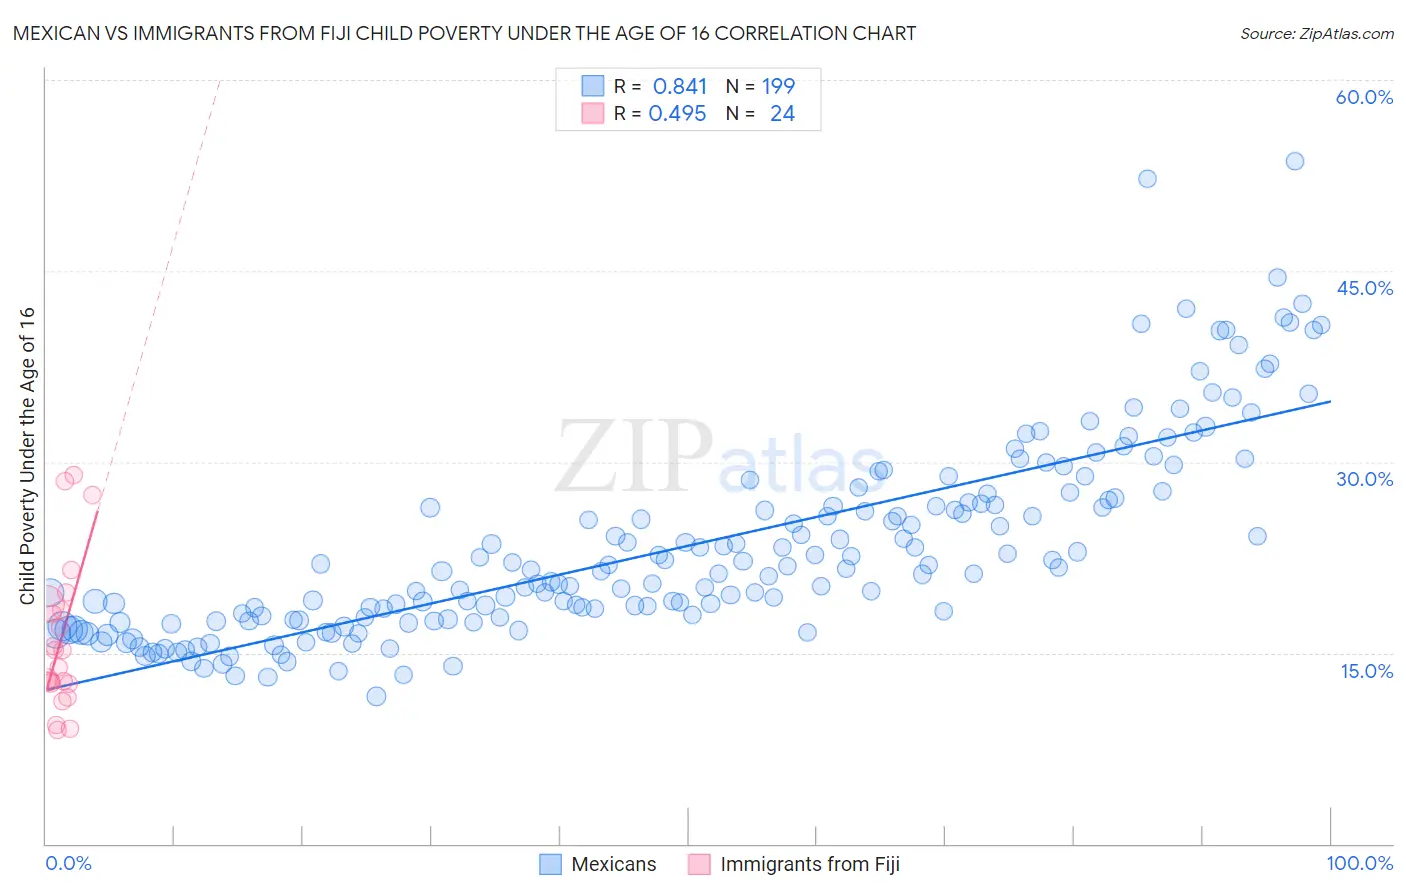 Mexican vs Immigrants from Fiji Child Poverty Under the Age of 16